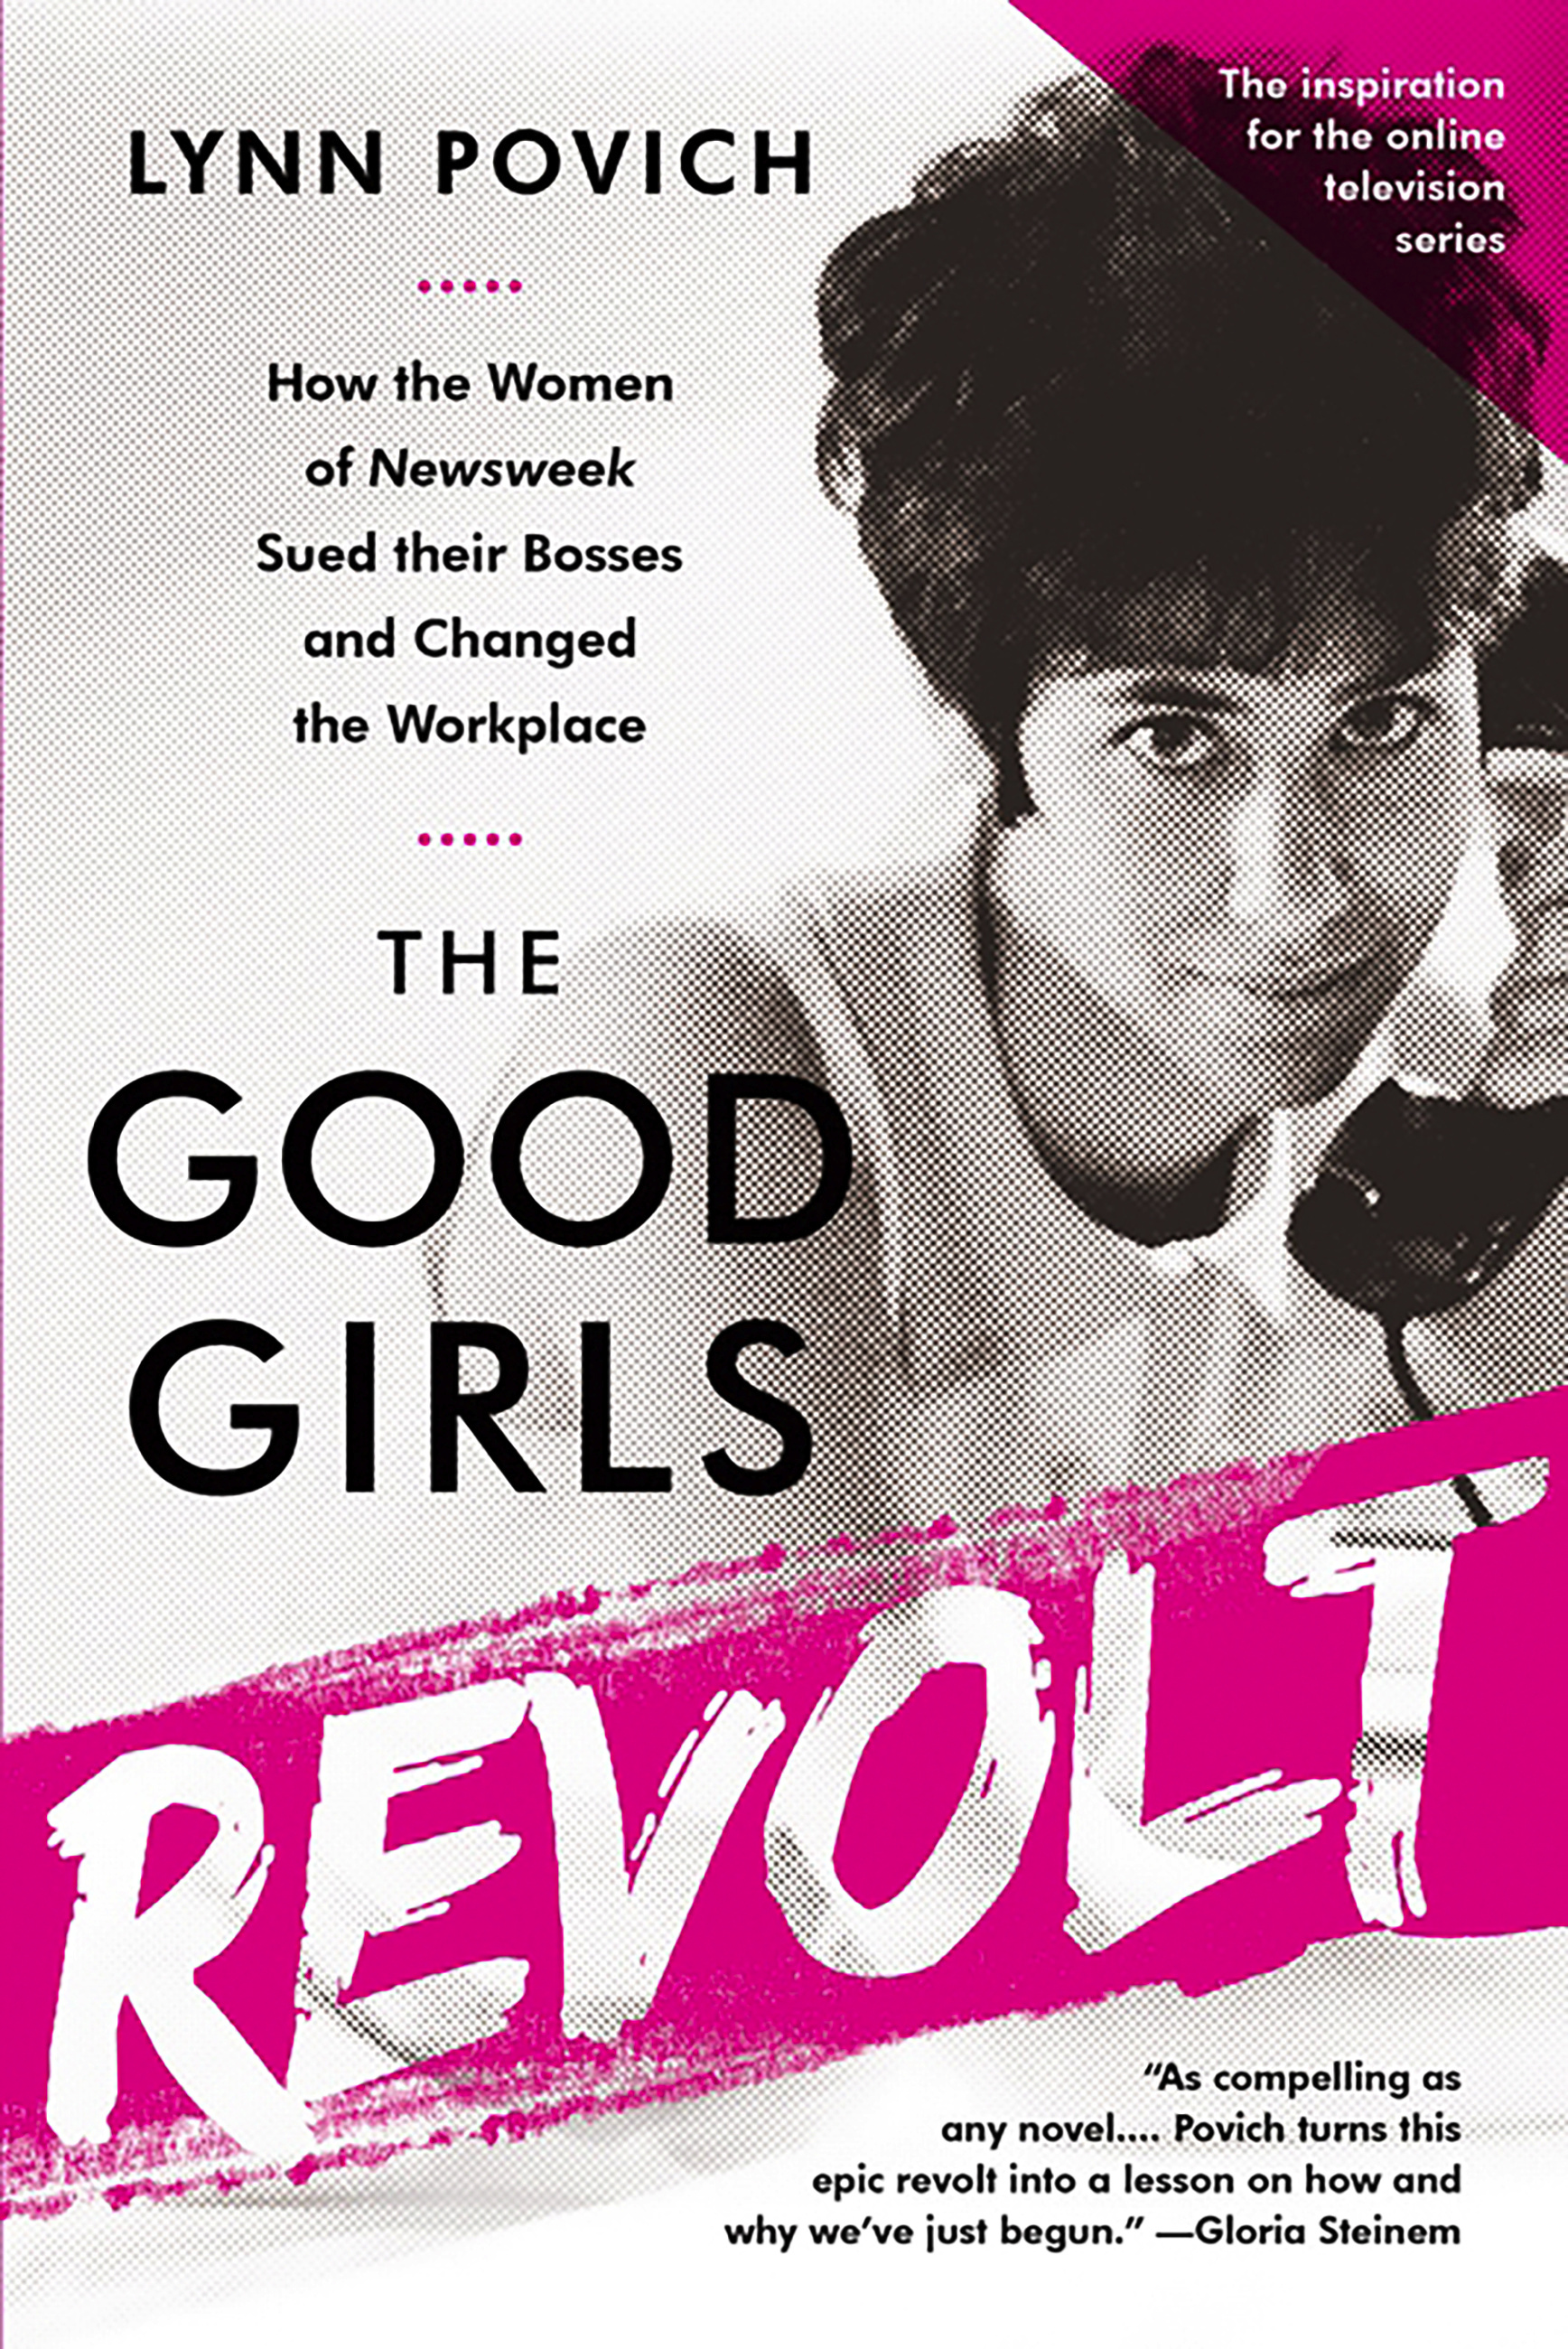 Good Girls: The Complete Series